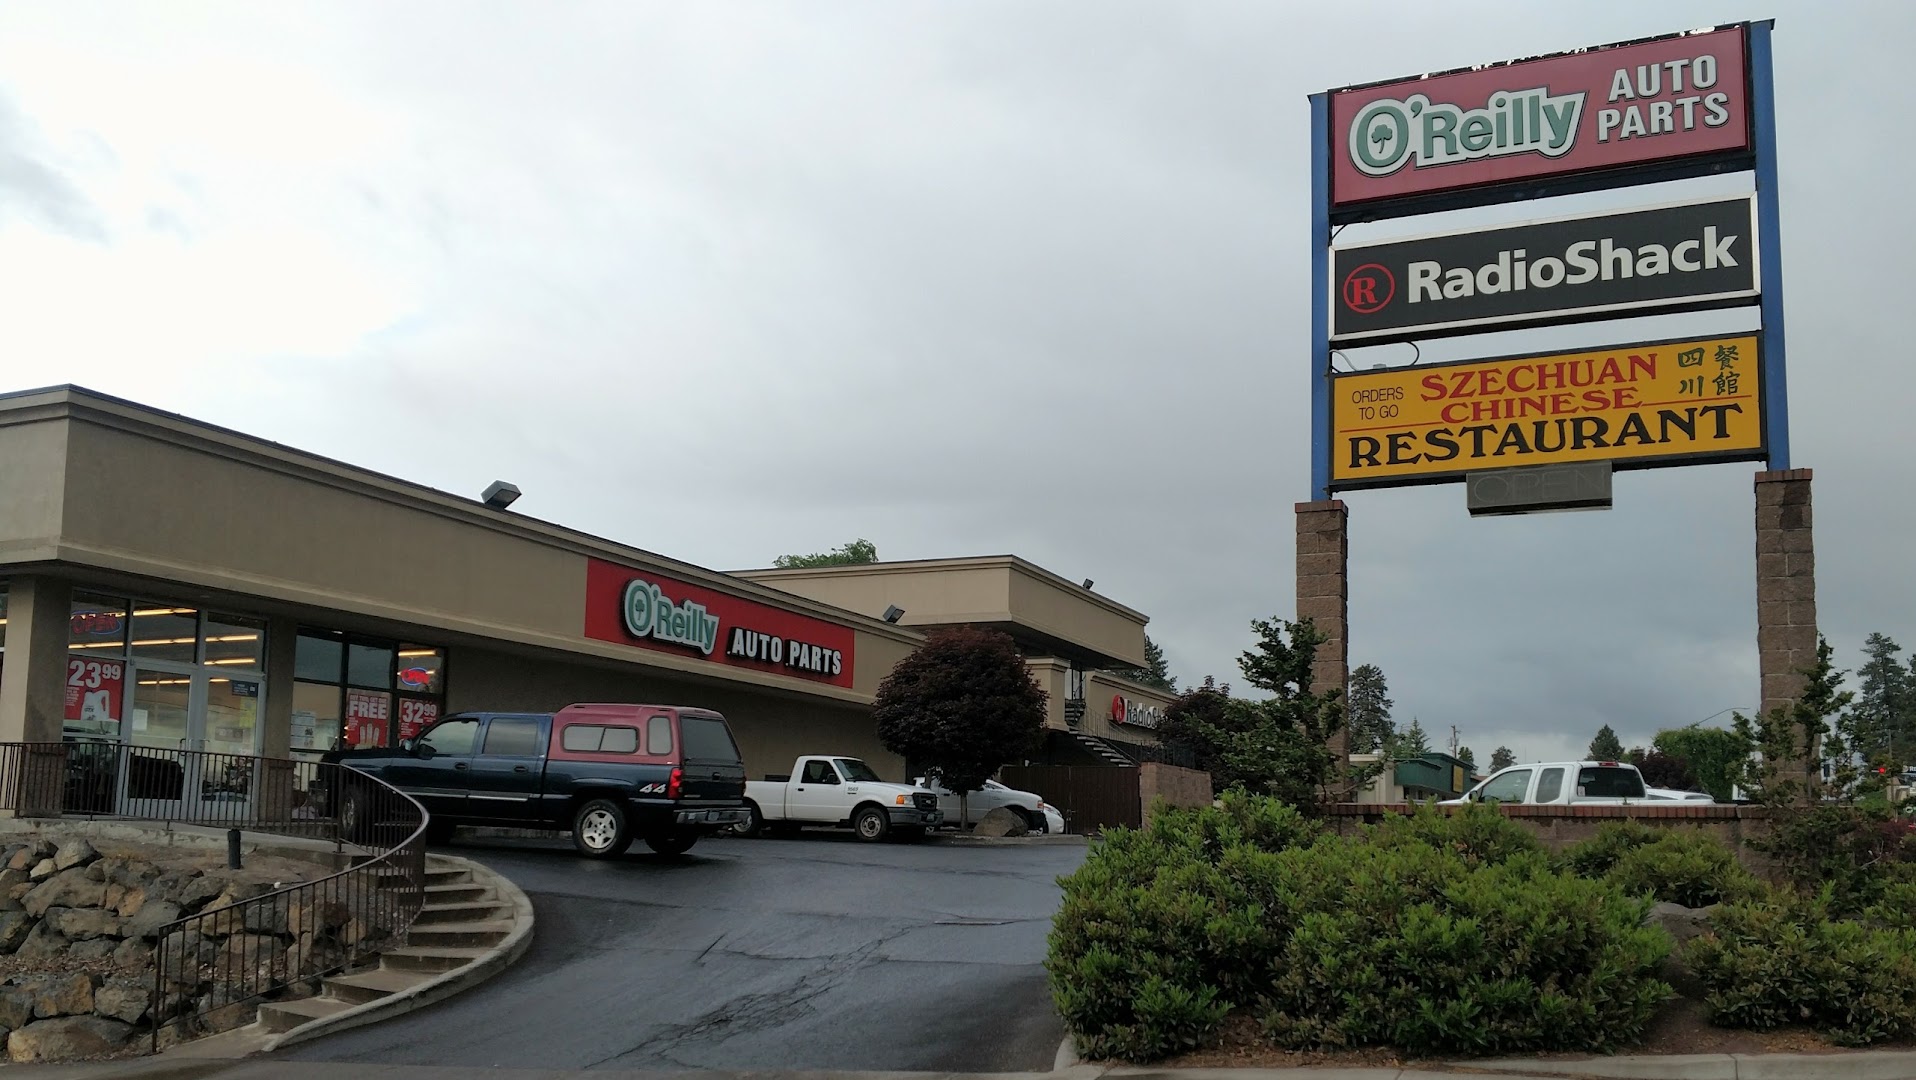 Auto parts store In Bend OR 